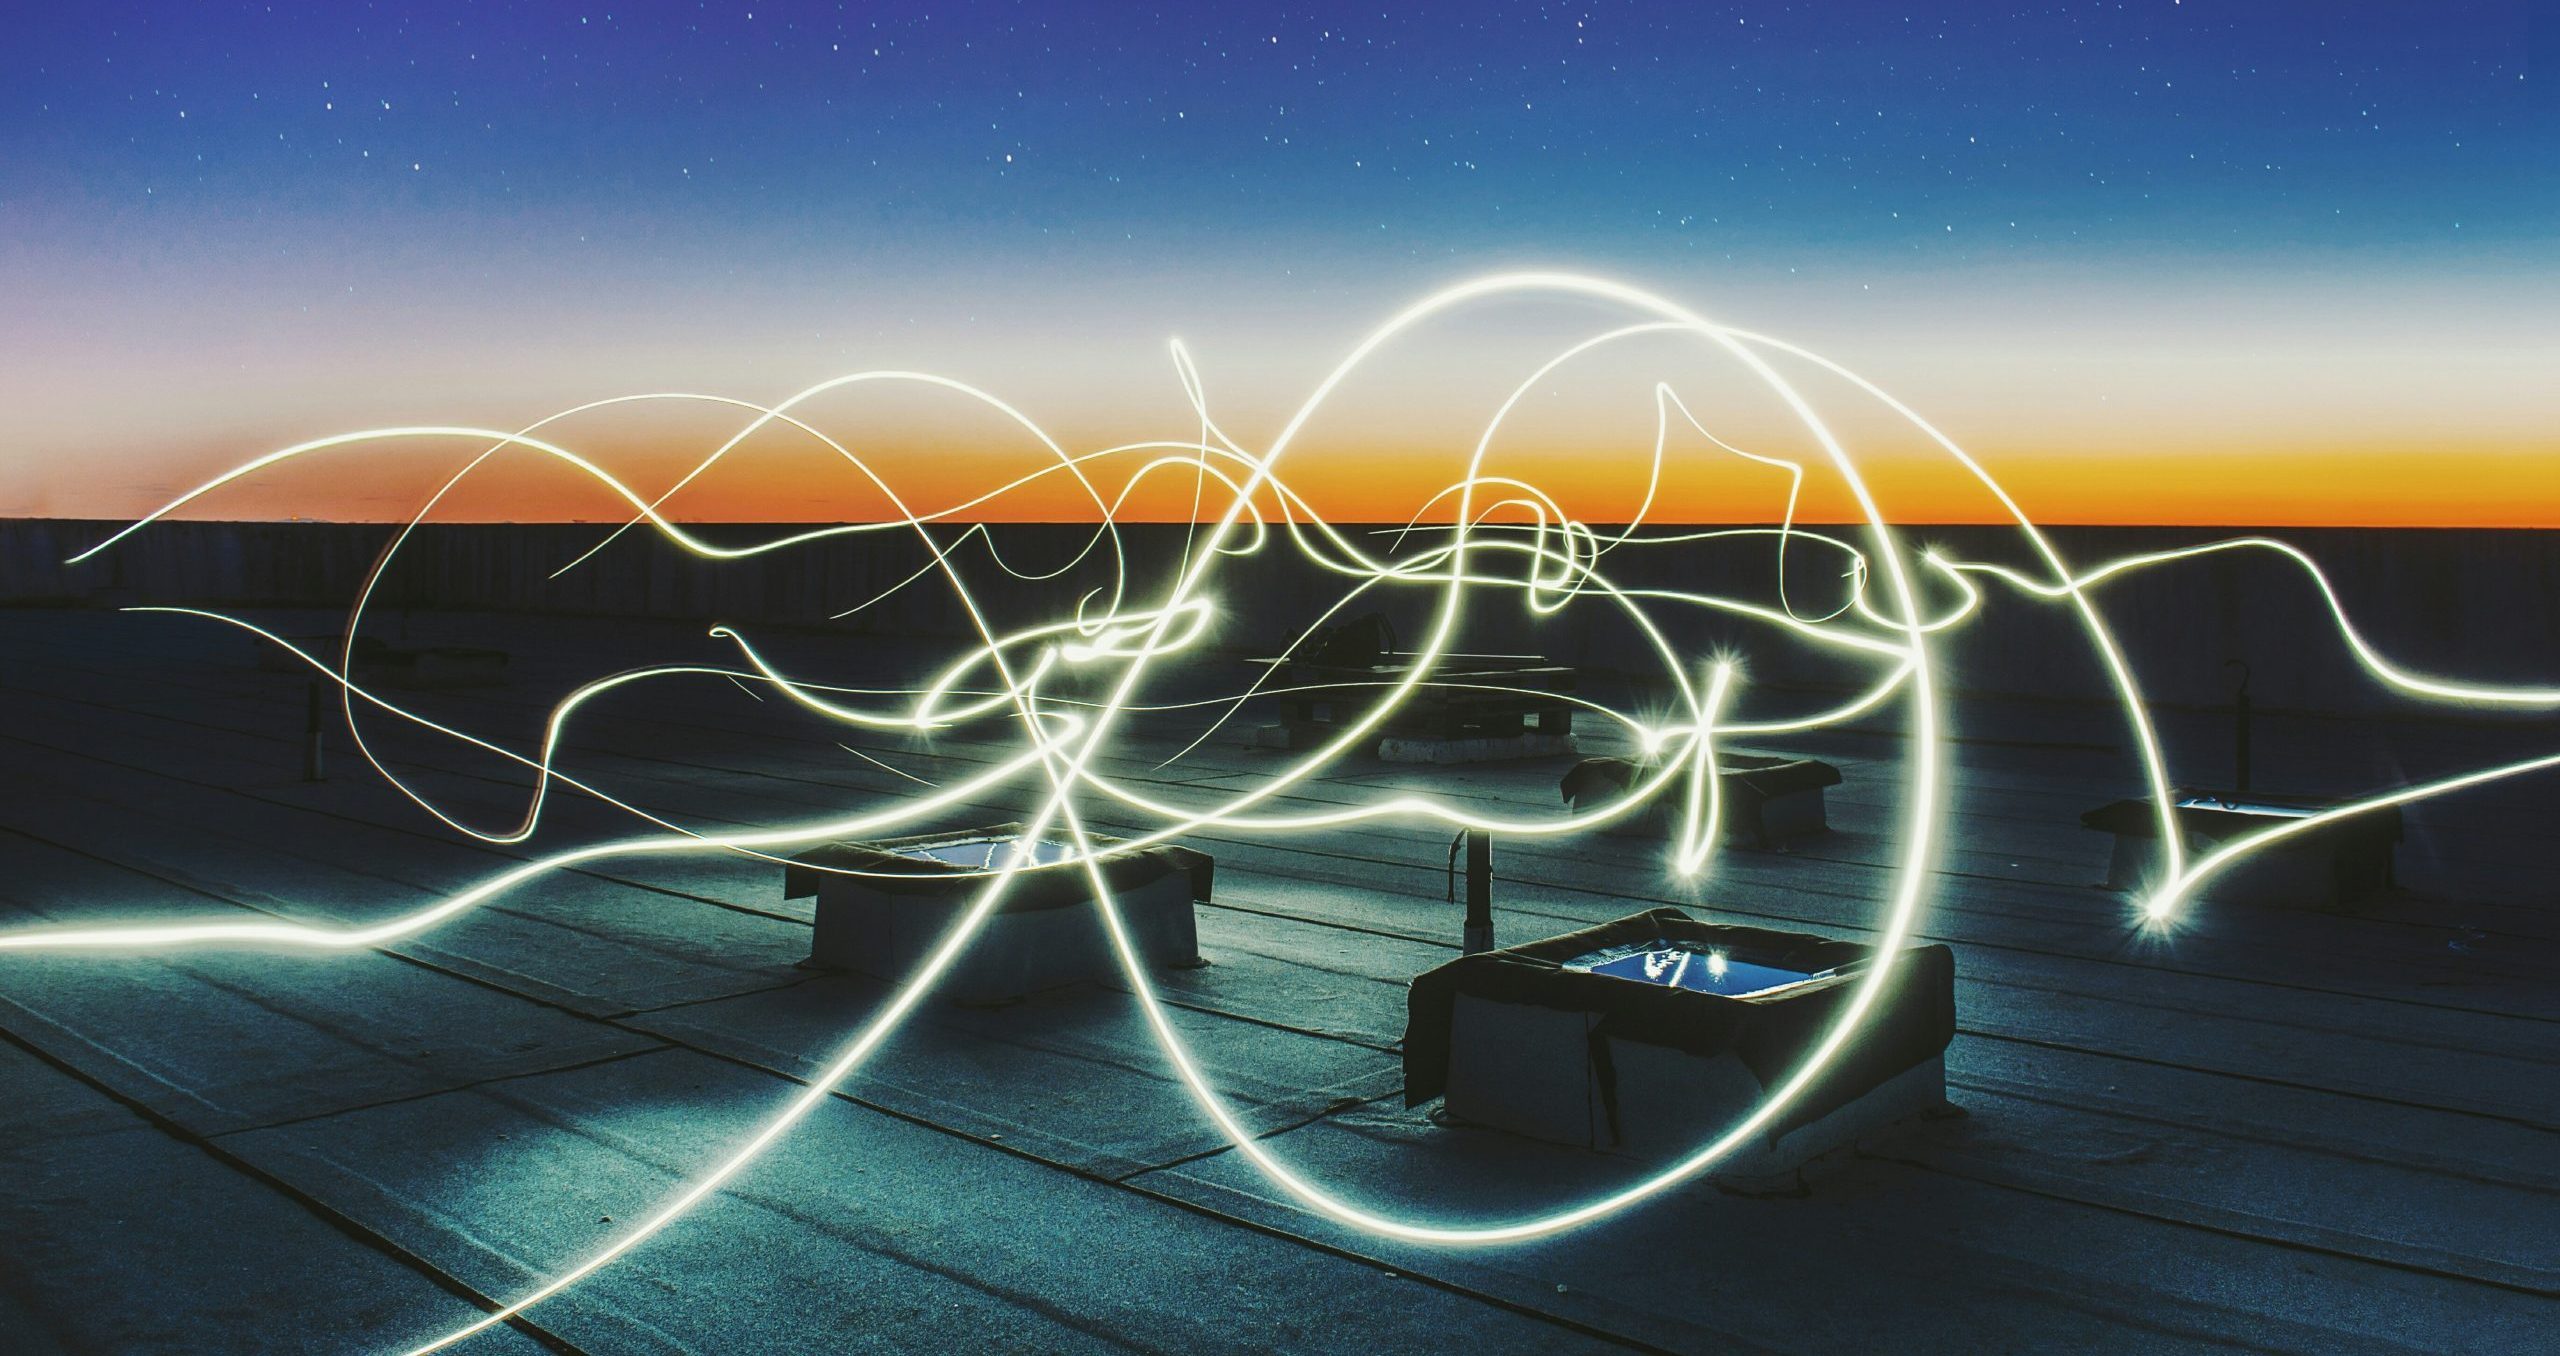 swirls that could be electricity touching down on boxes with screens, sunset in the distance